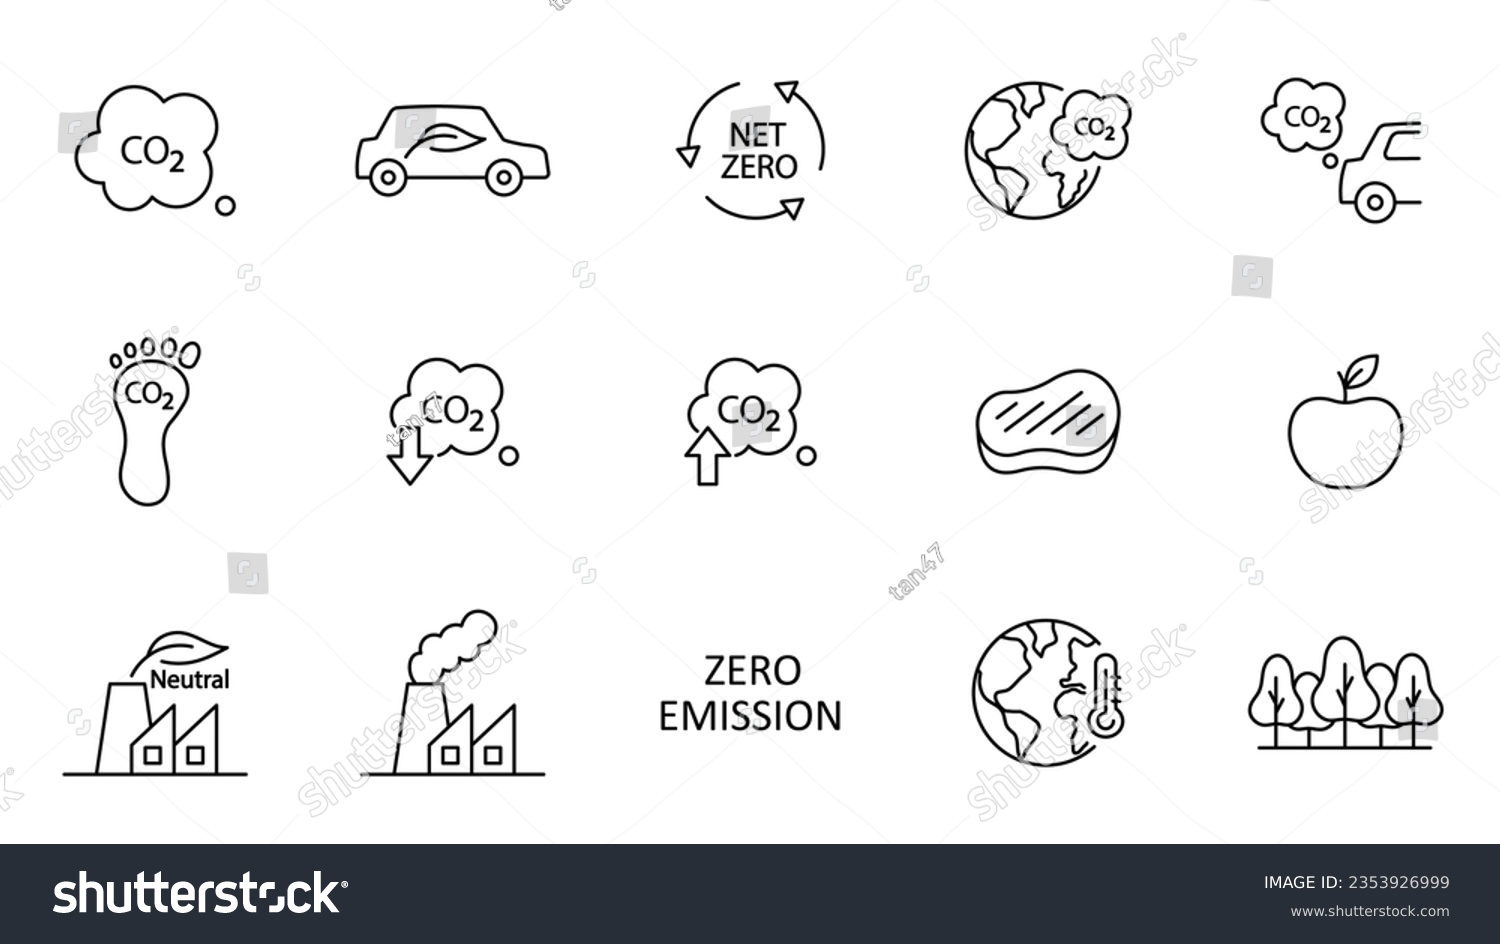 SVG of Icon collection with zero emission symbol concept. greenhouse gas carbon credit design set. protect ecological green vector outline. carbon net zero neutral natural. carbon footprint art pictogram svg